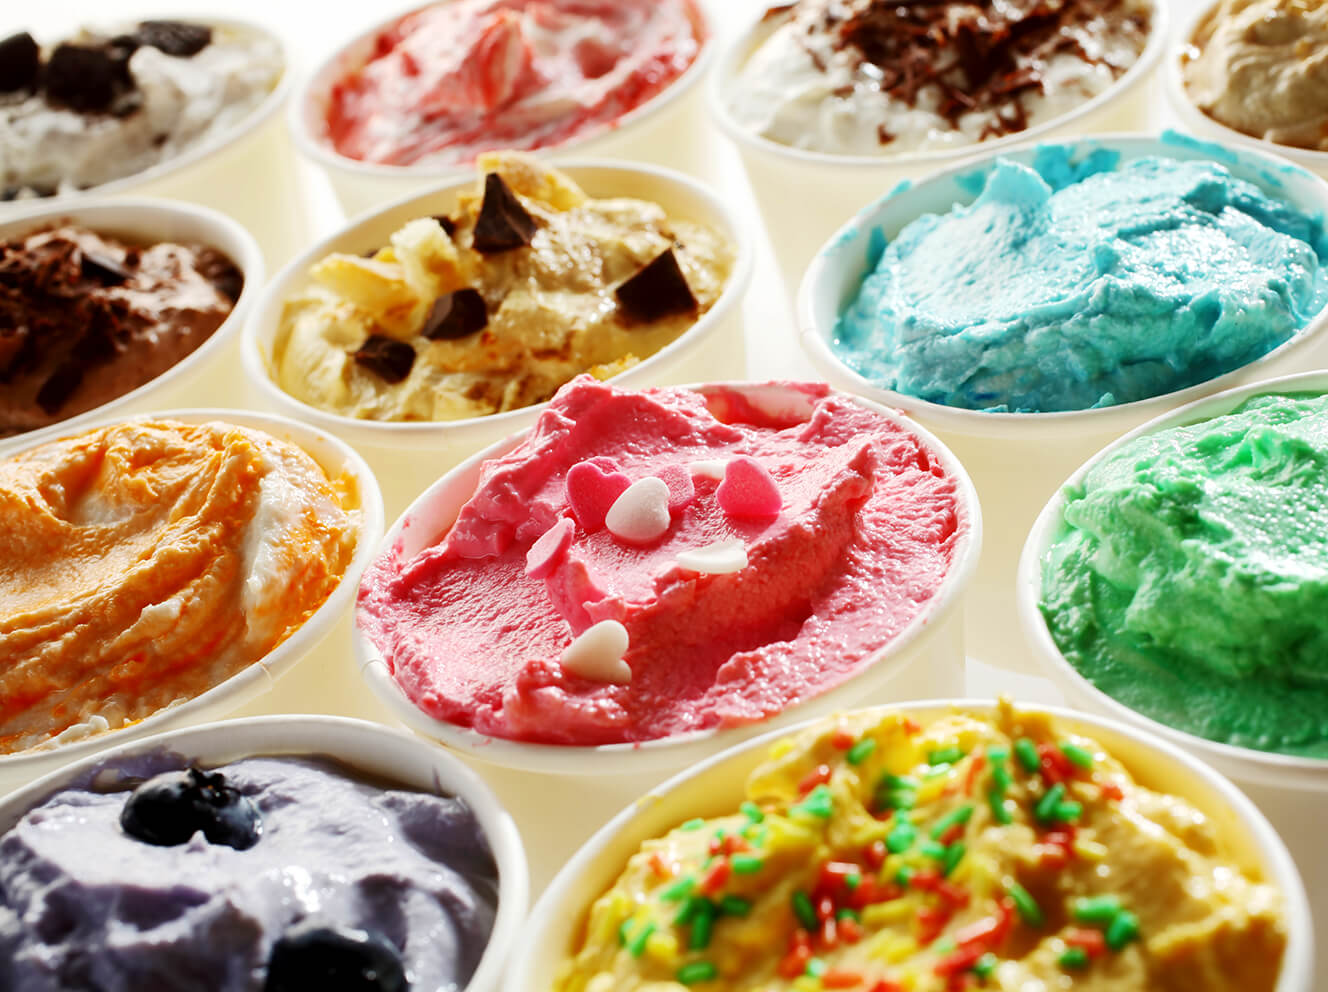 ice creams of different flavors